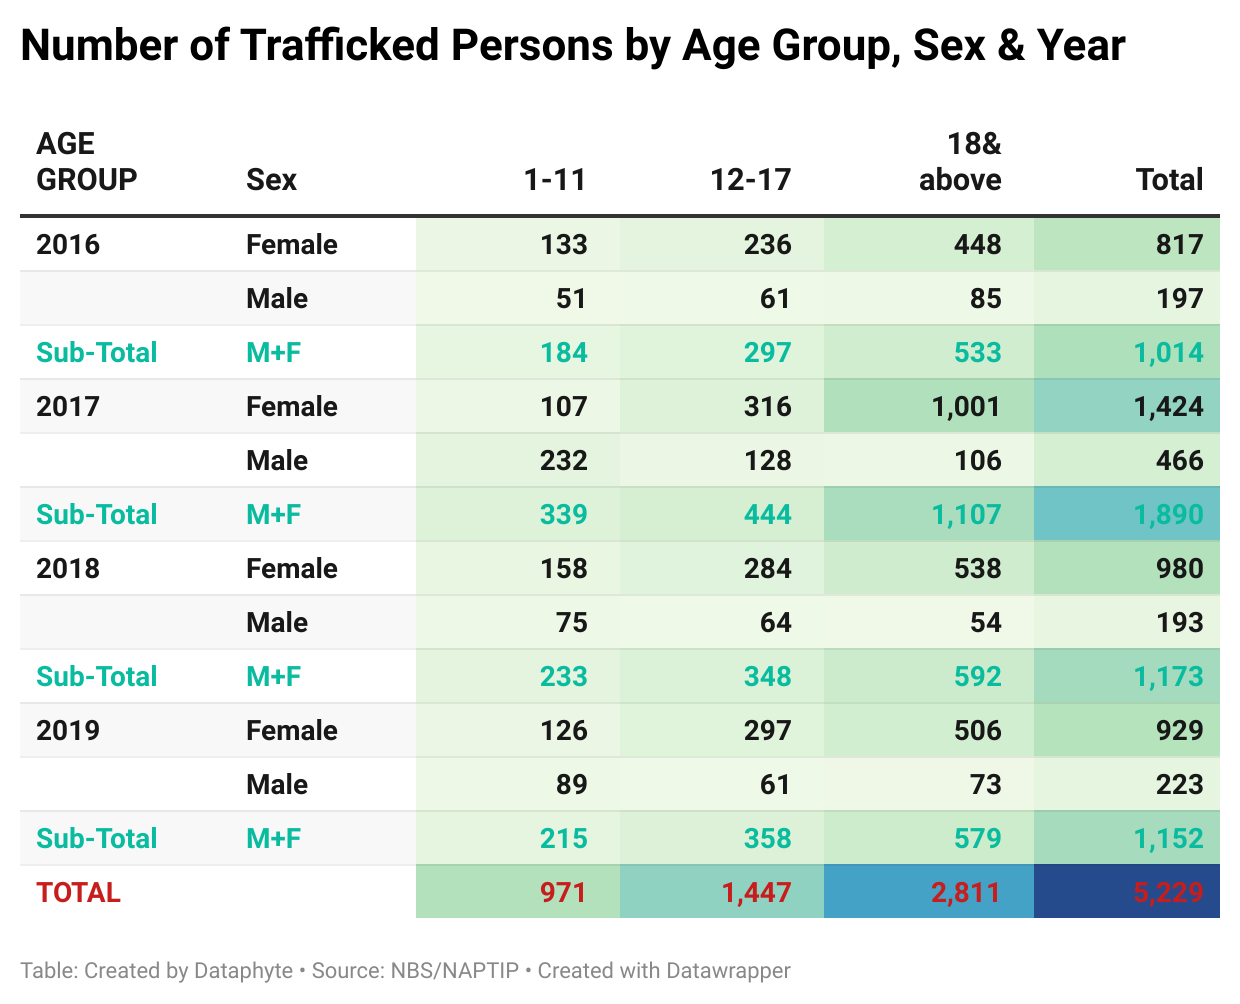 Human Trafficking: Nigeria Records Slight Decline in Number of Persons Trafficked